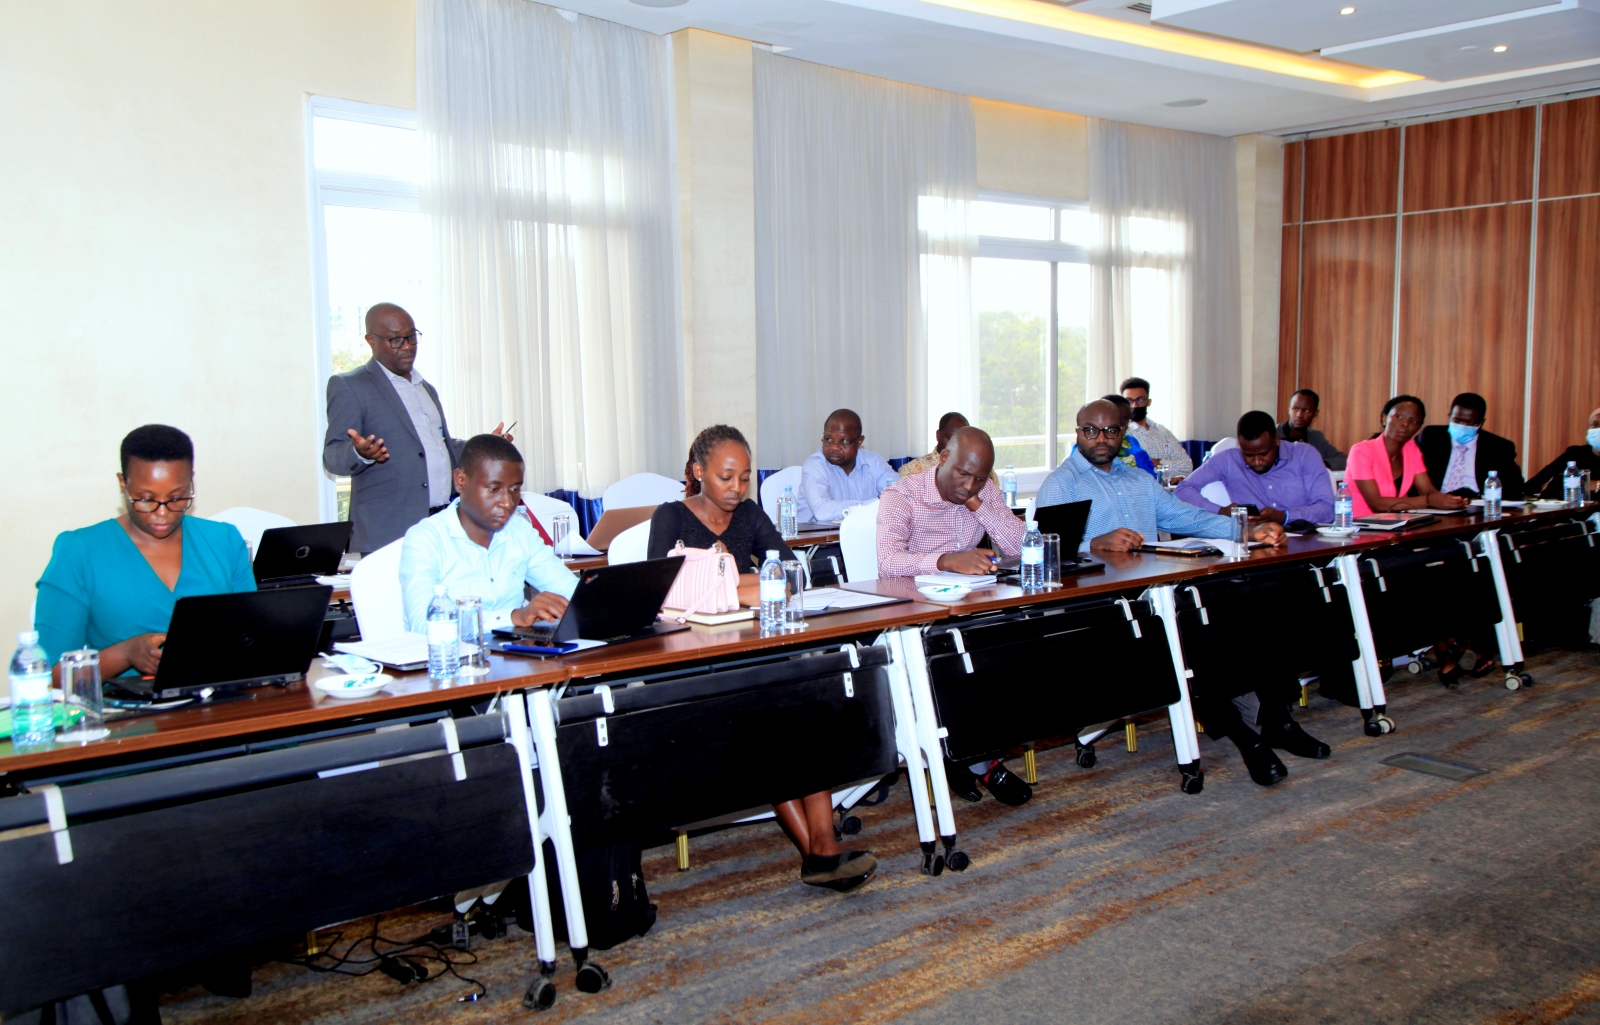 Dr. Revocatus Twinomuhangi, Senior Lecturer and Coordinator of the Makerere University Centre for Climate Change Research and Innovation-MUCCRI (Standing) addresses participants during the Consultation Meeting on 30th June 2022, Golden Tulip Cannan Hotel, Kampala.